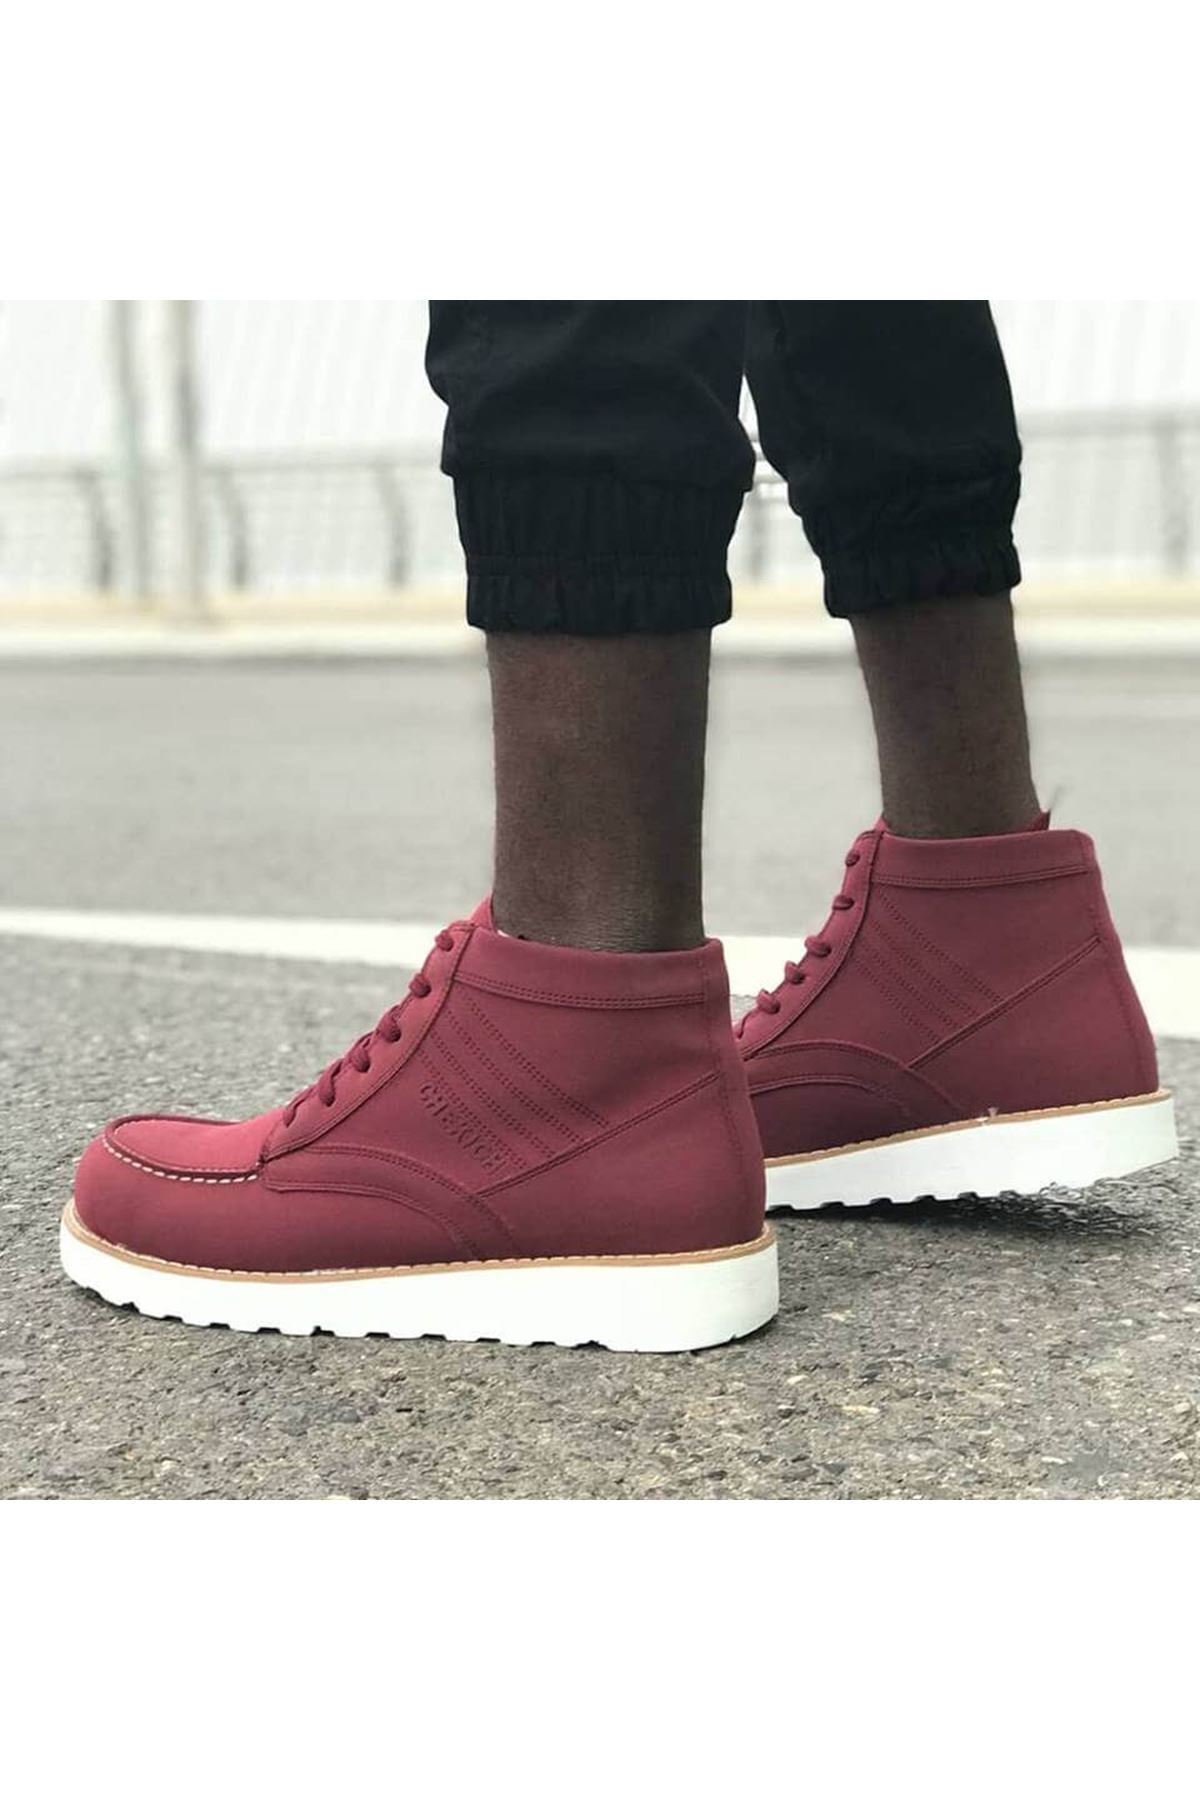 CH047 Men's Burgundy-White Sole Lace-Up Sneaker Sports Boots - STREET MODE ™